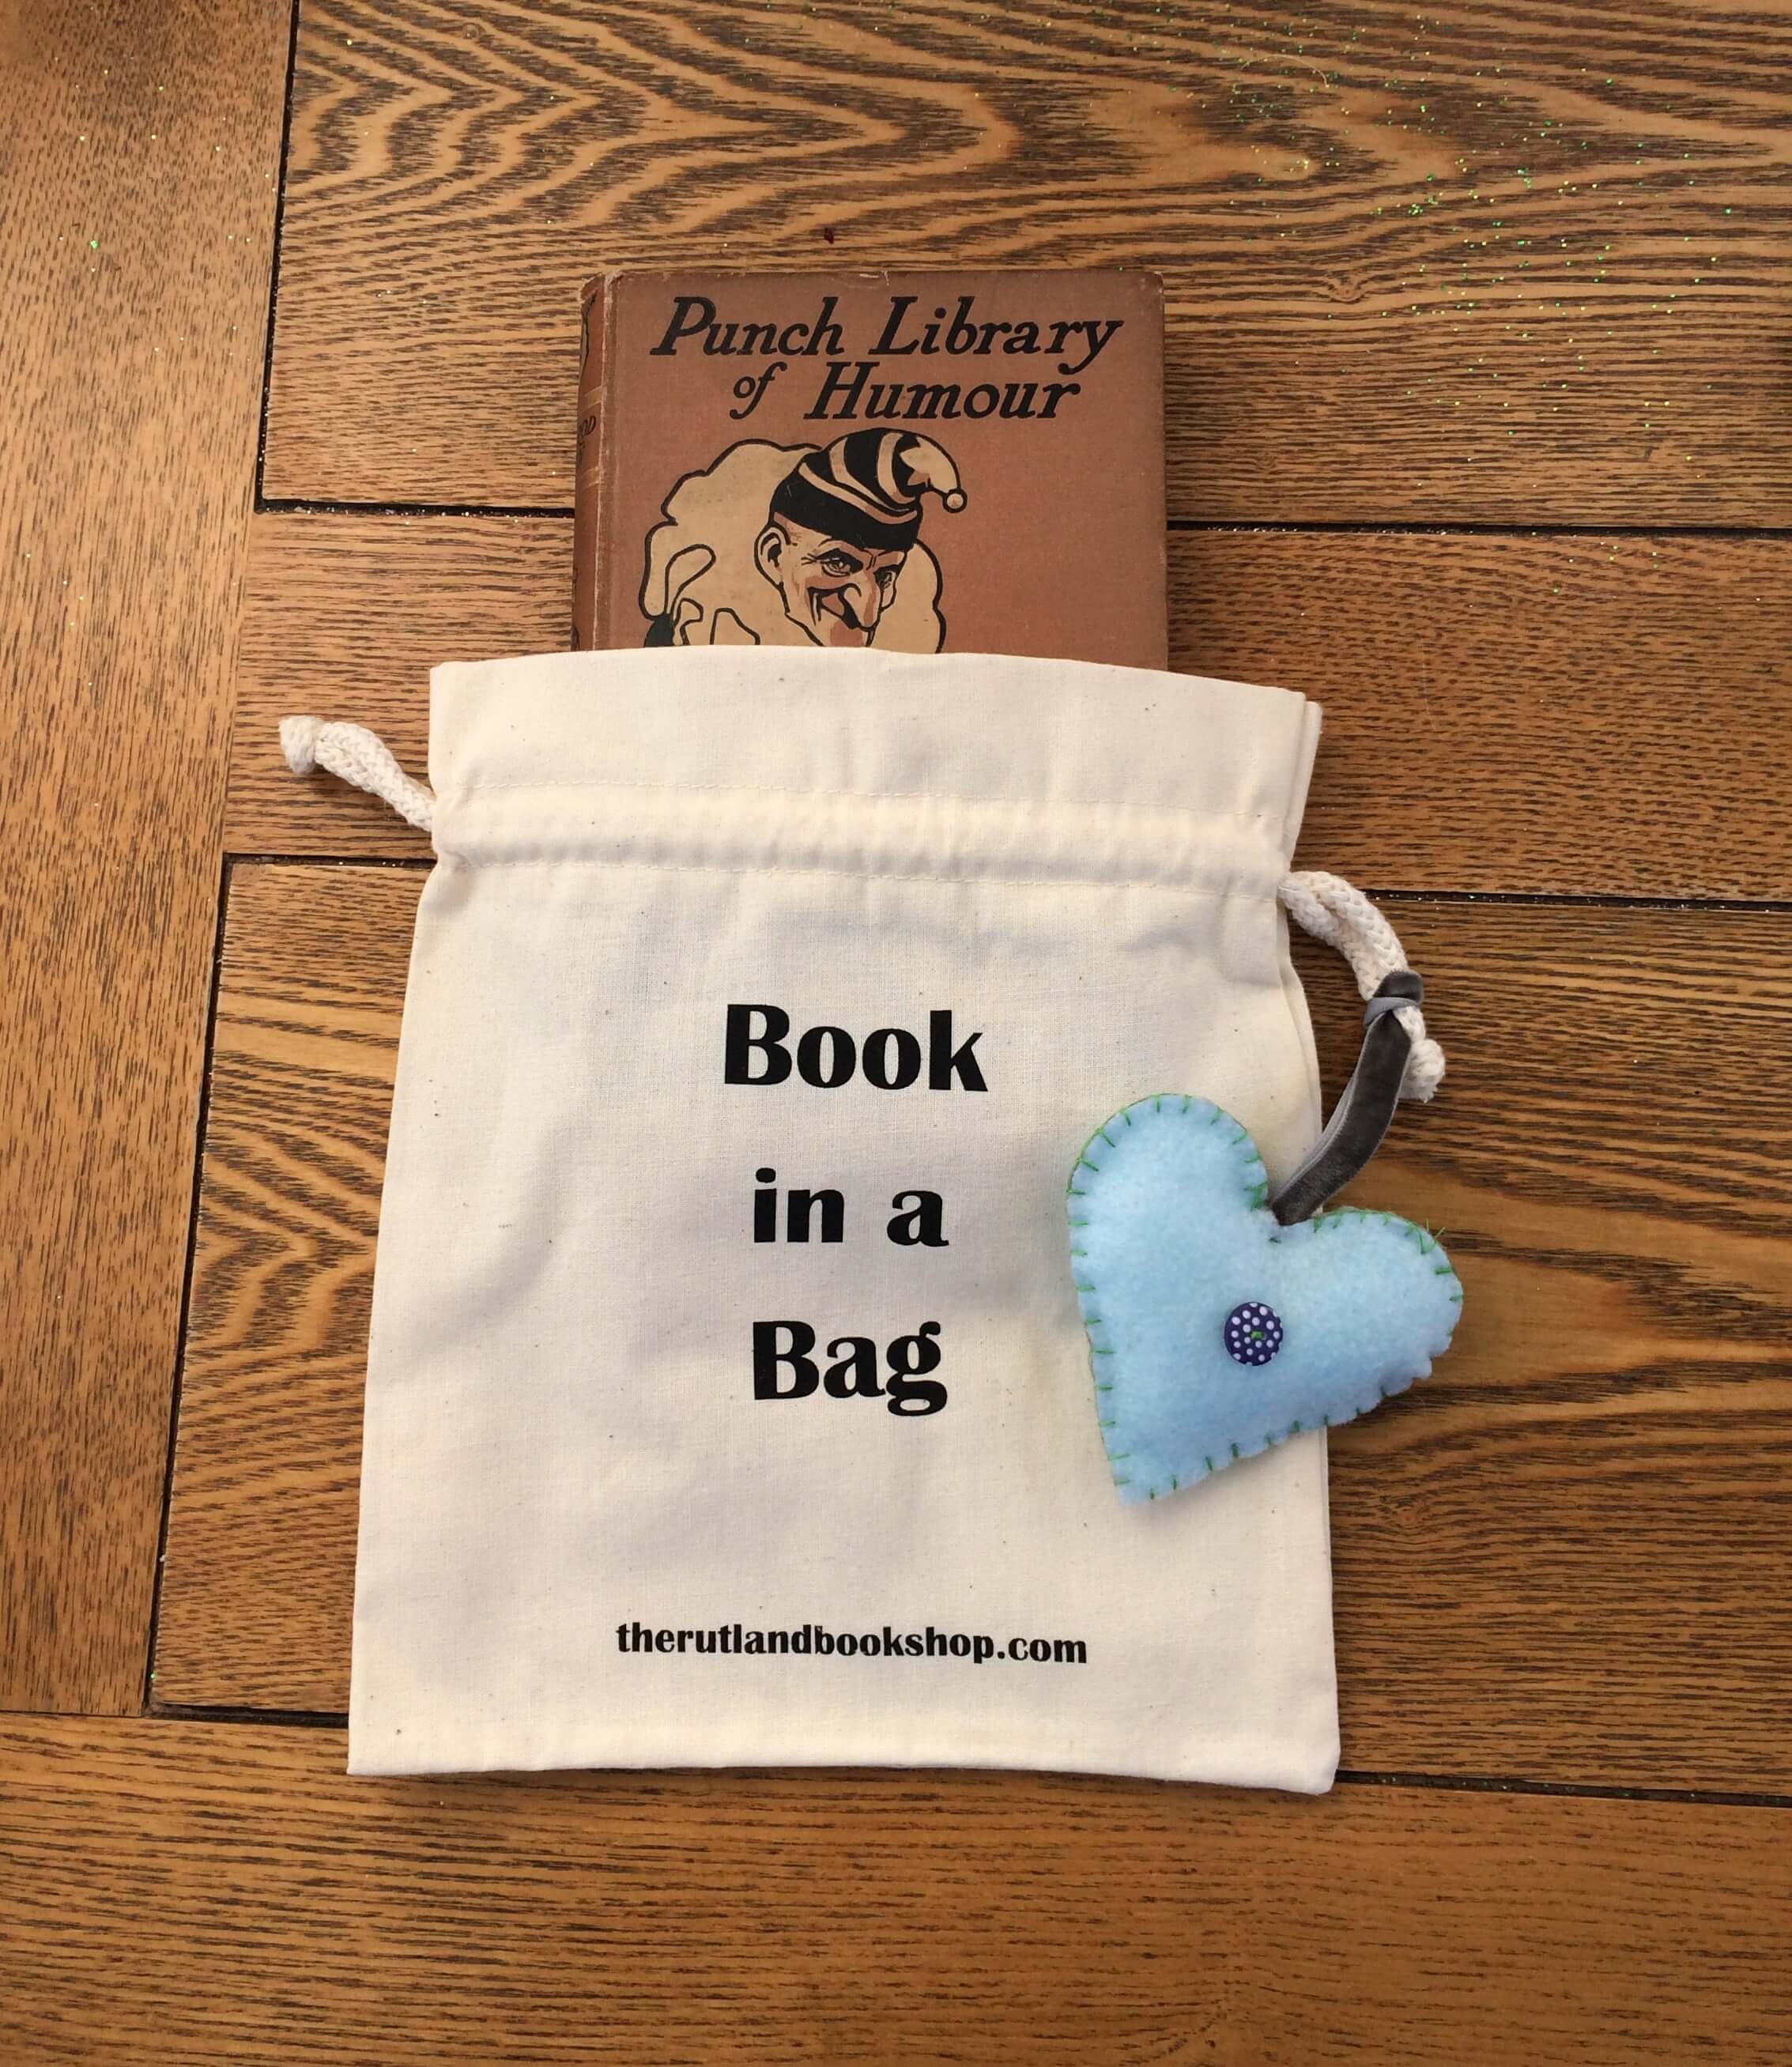 Punch Library of Humour: With Rod and Gun (book in a bag)